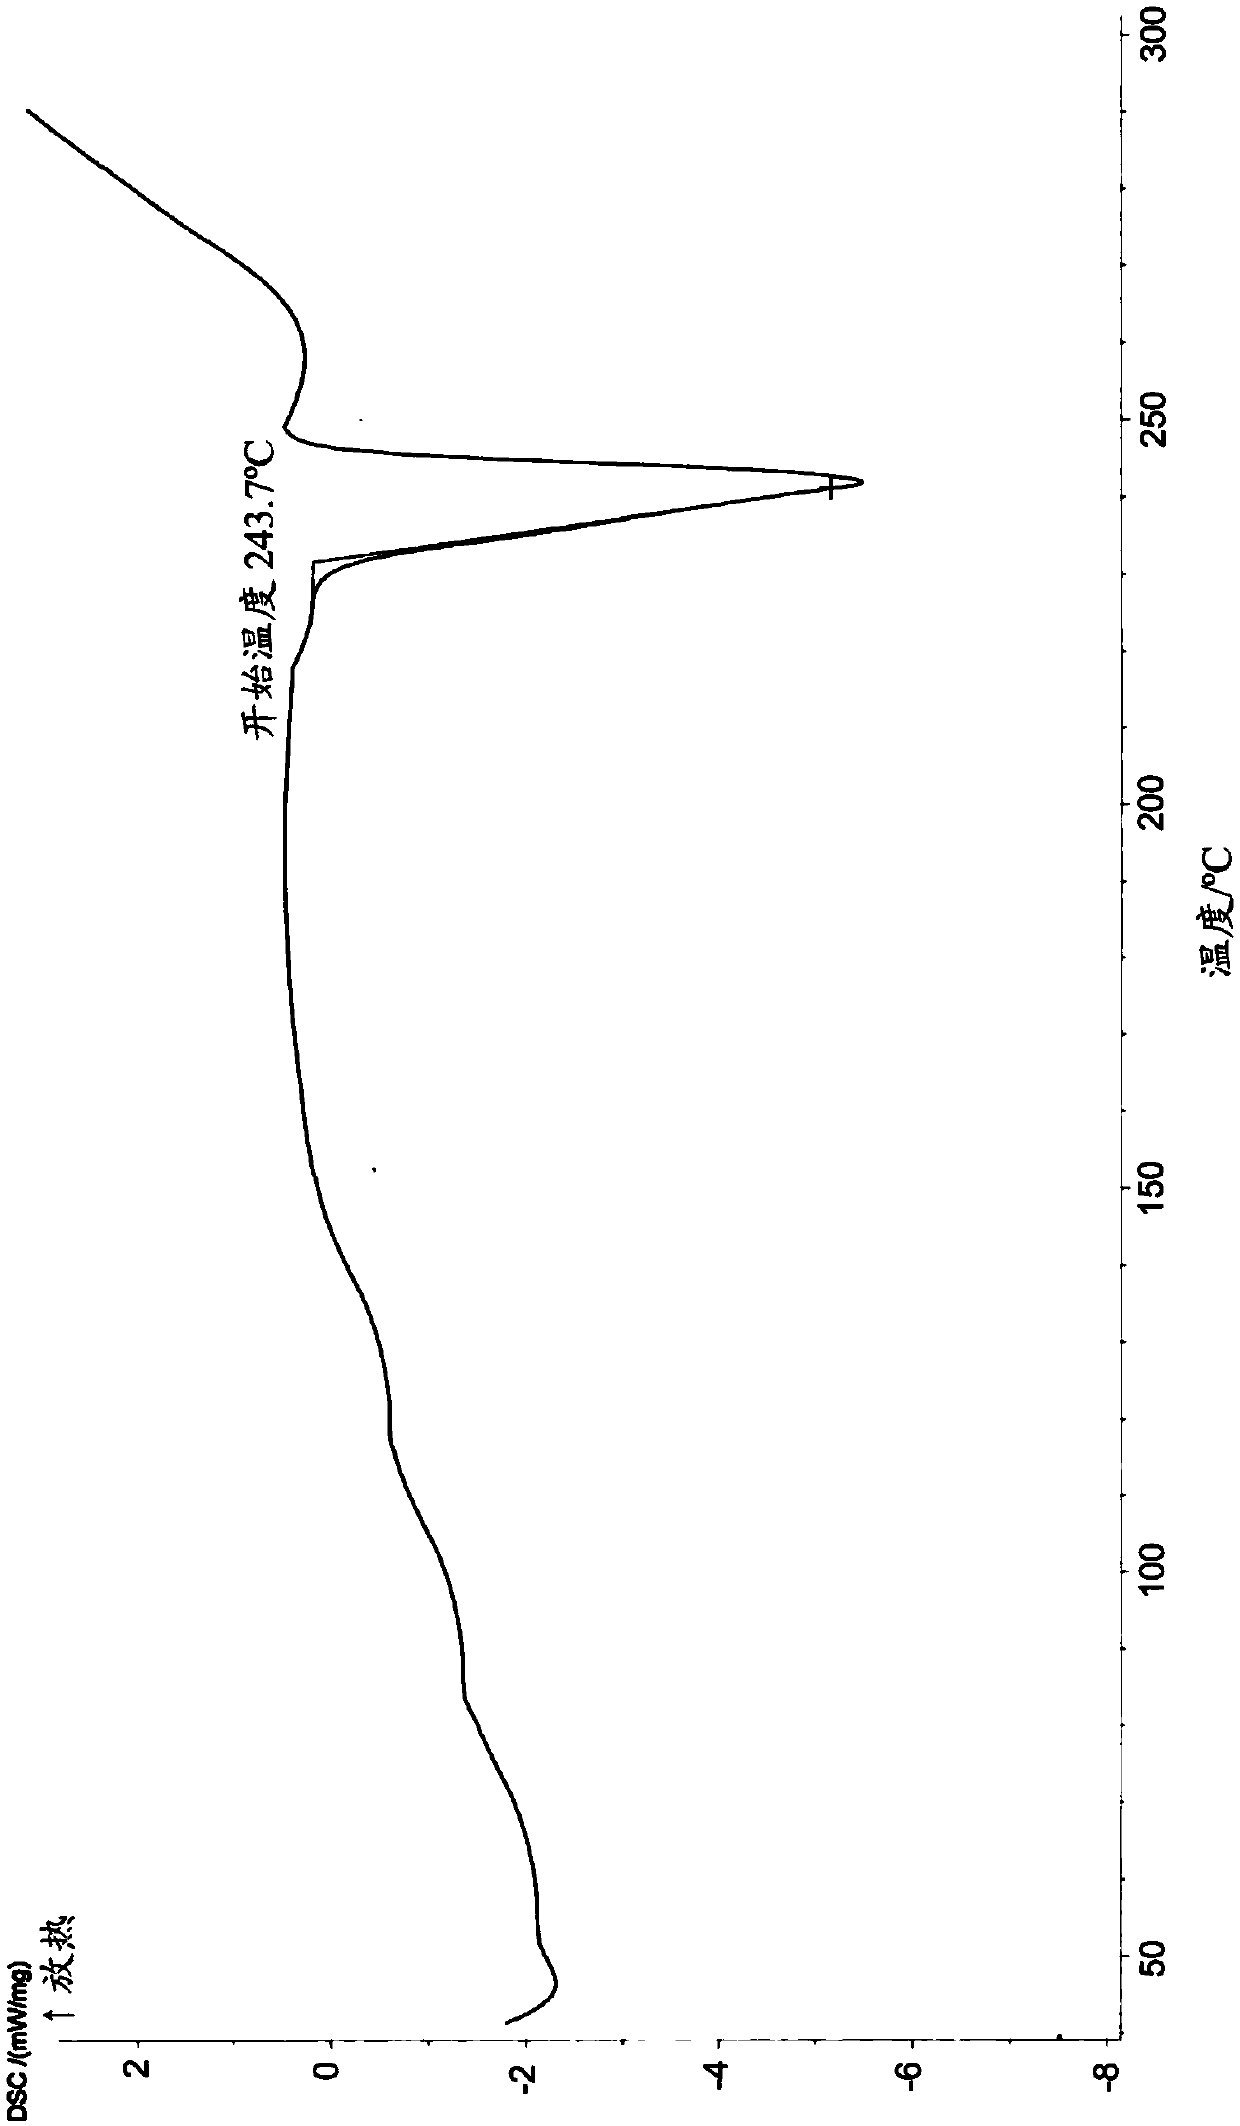 Alfentanil pharmaceutical composition for transdermal administration as well as preparation method and application of pharmaceutical composition